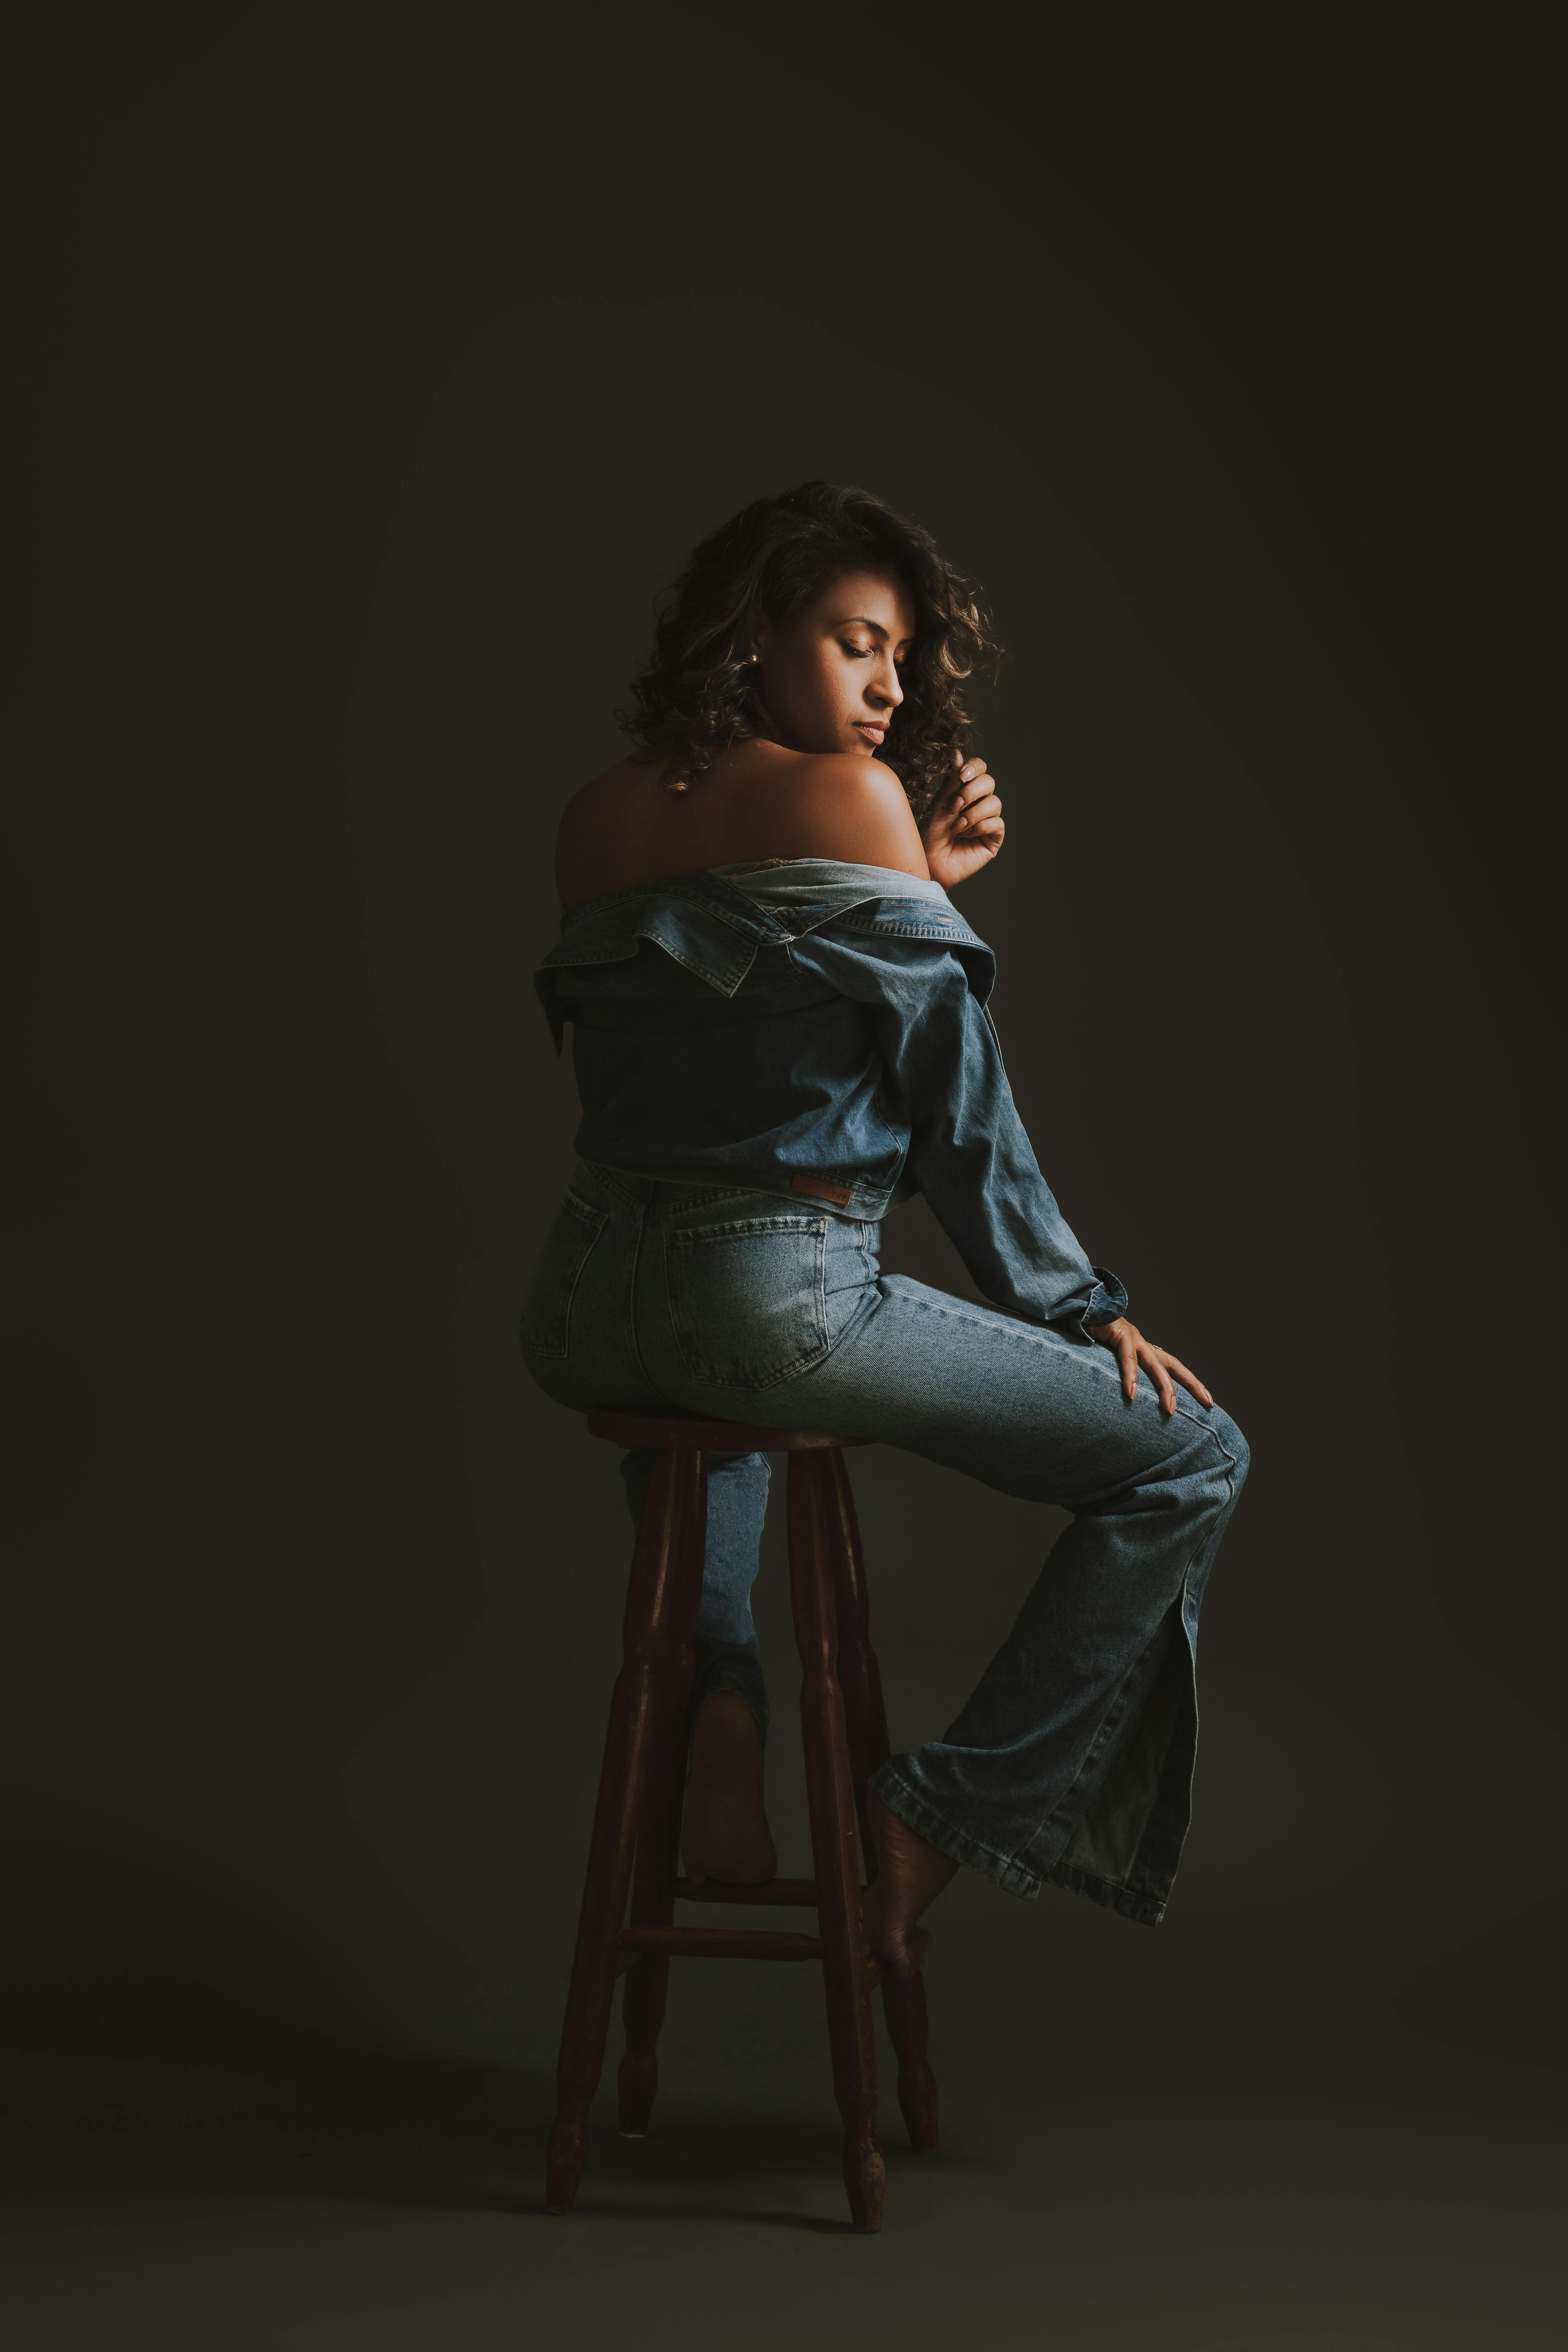 free photo of back view of a woman sitting on a stool